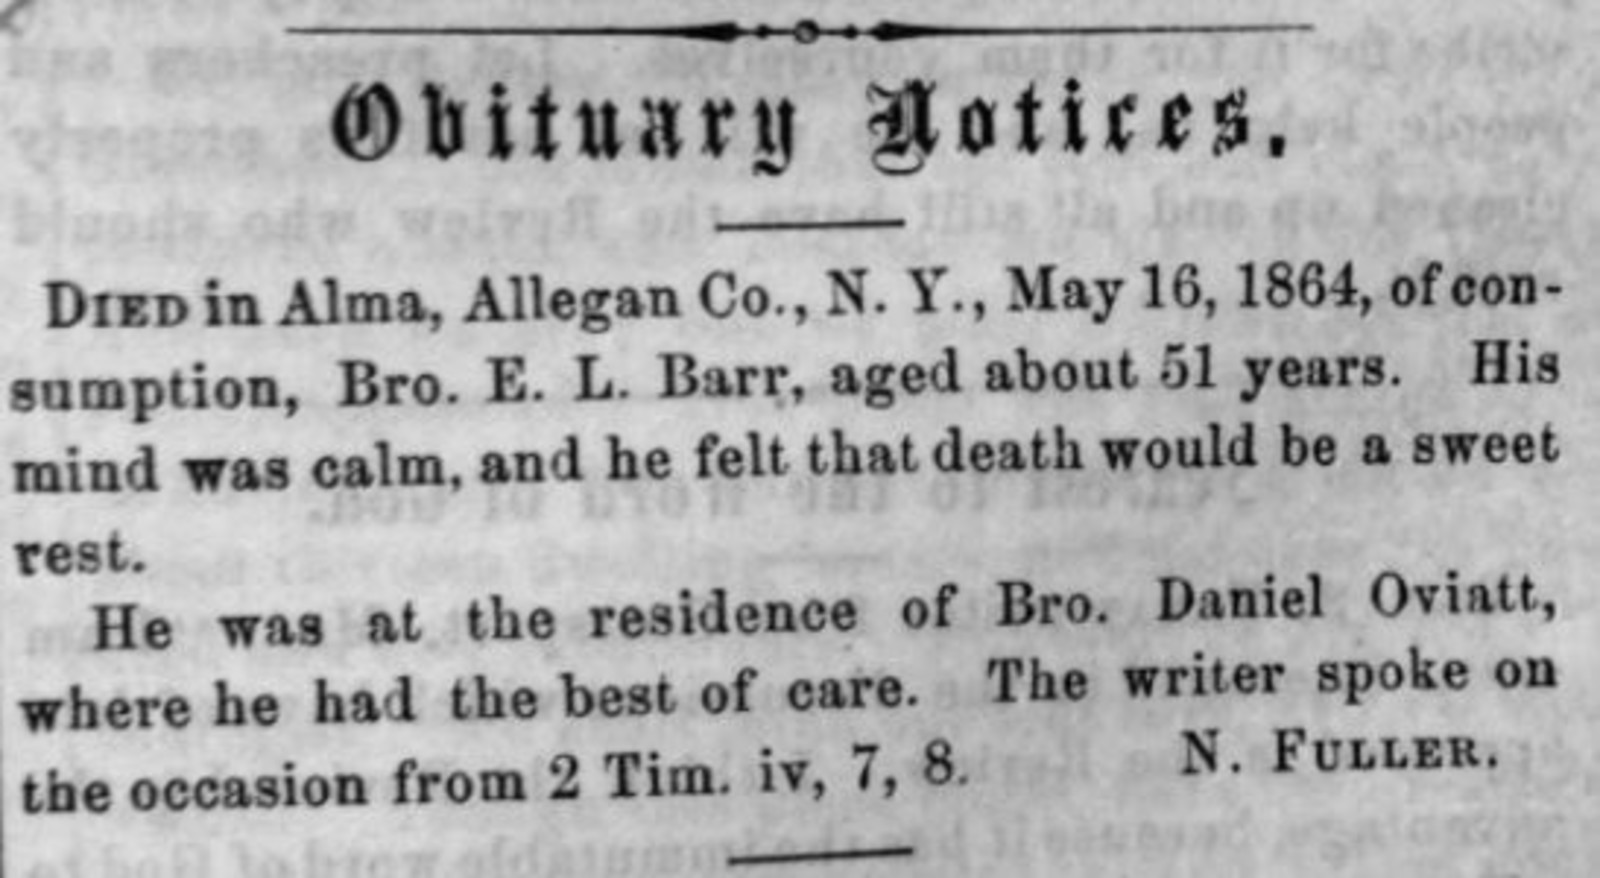 Image 8 of The New York herald (New York [N.Y.]), July 22, 1864